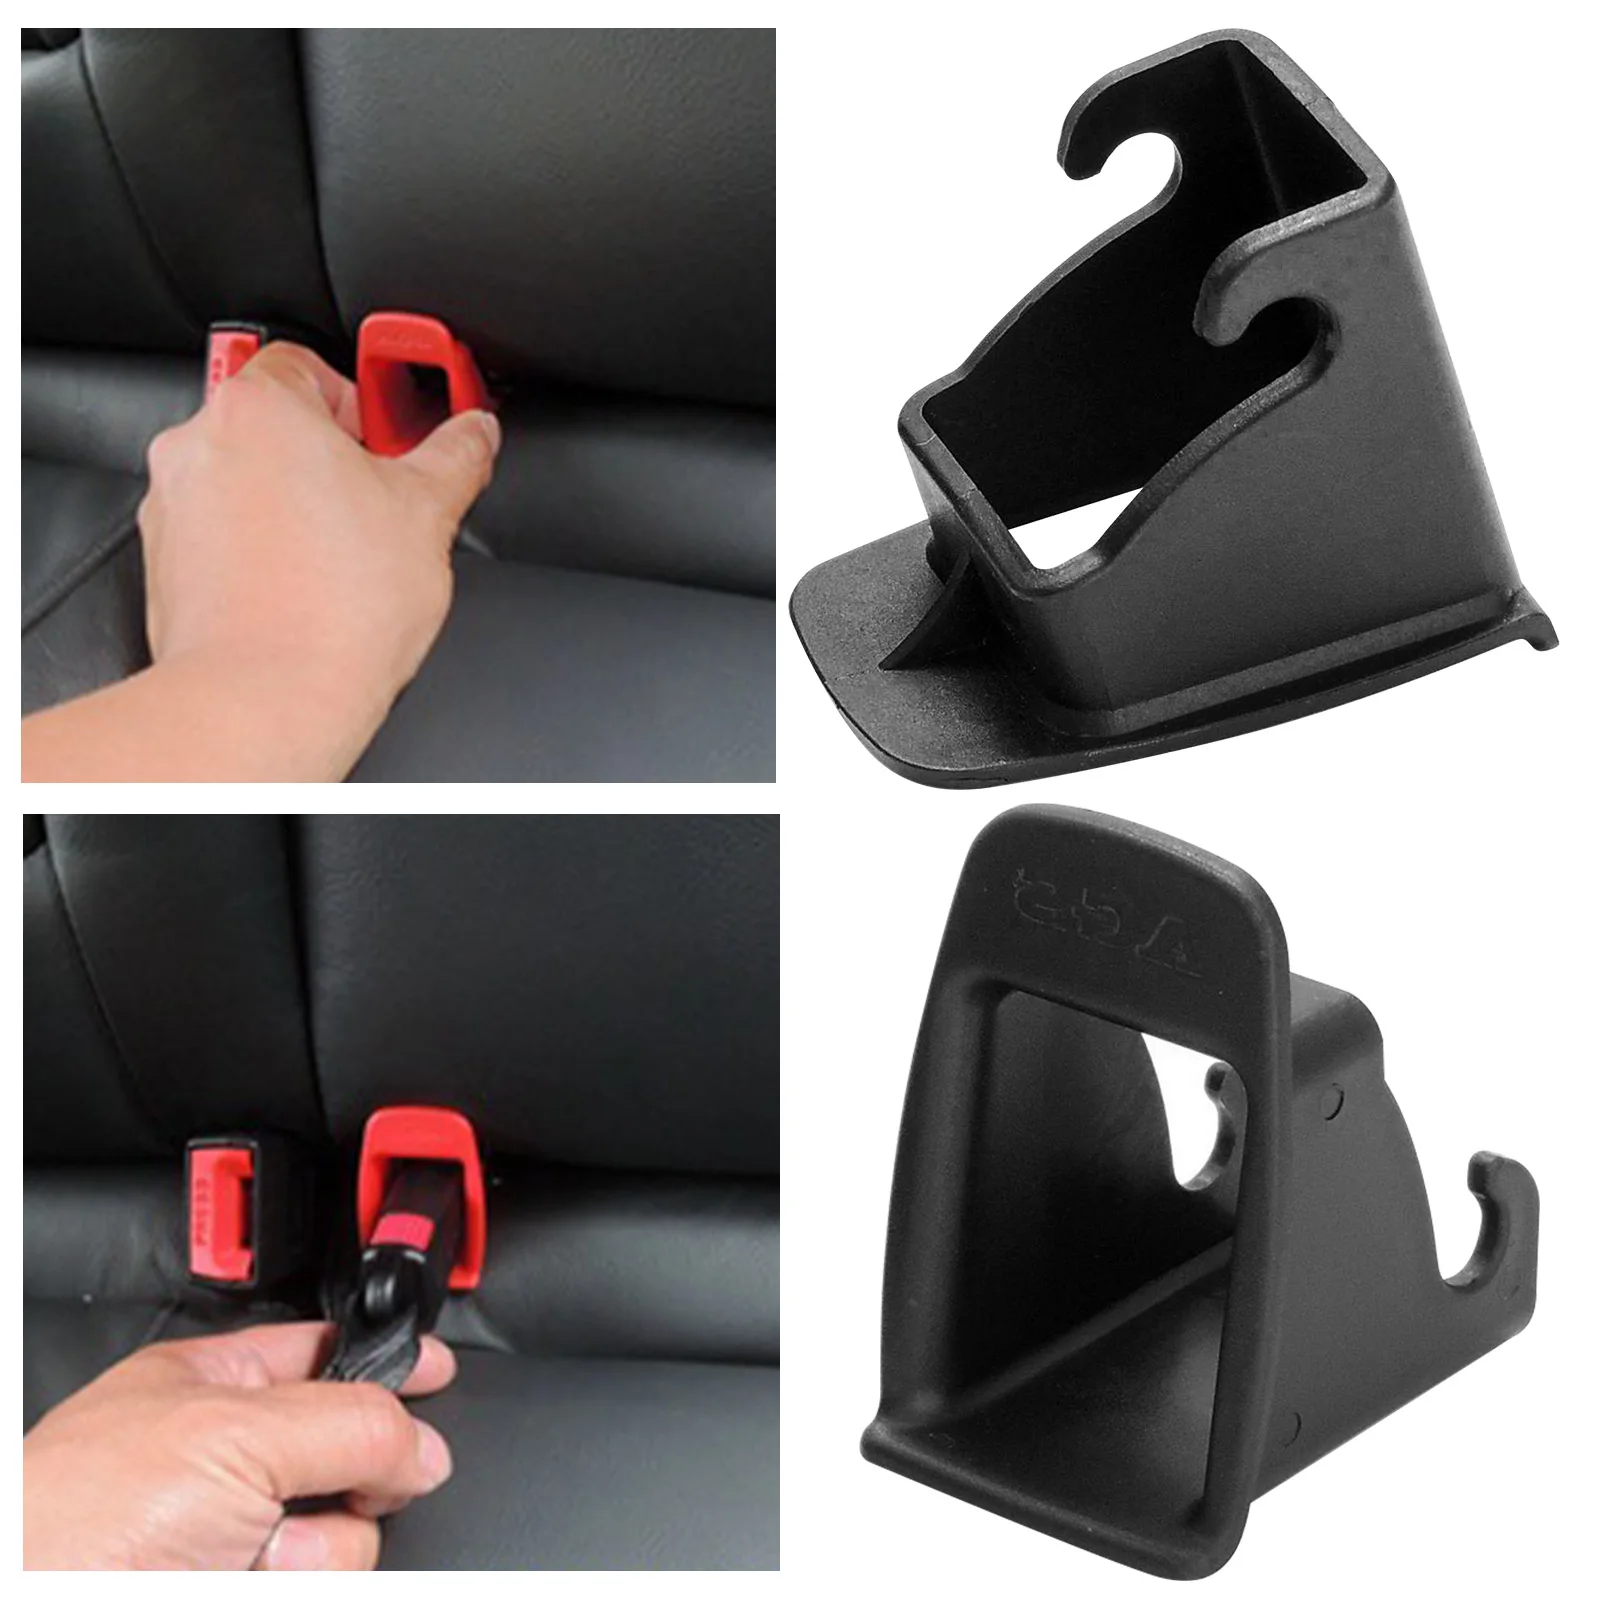 Car Baby Seat ISOFIX Latch Belt Connector Guide Groove Child Safety Base Mount Bracket For BMW Benz Honda Toyota Hyundai